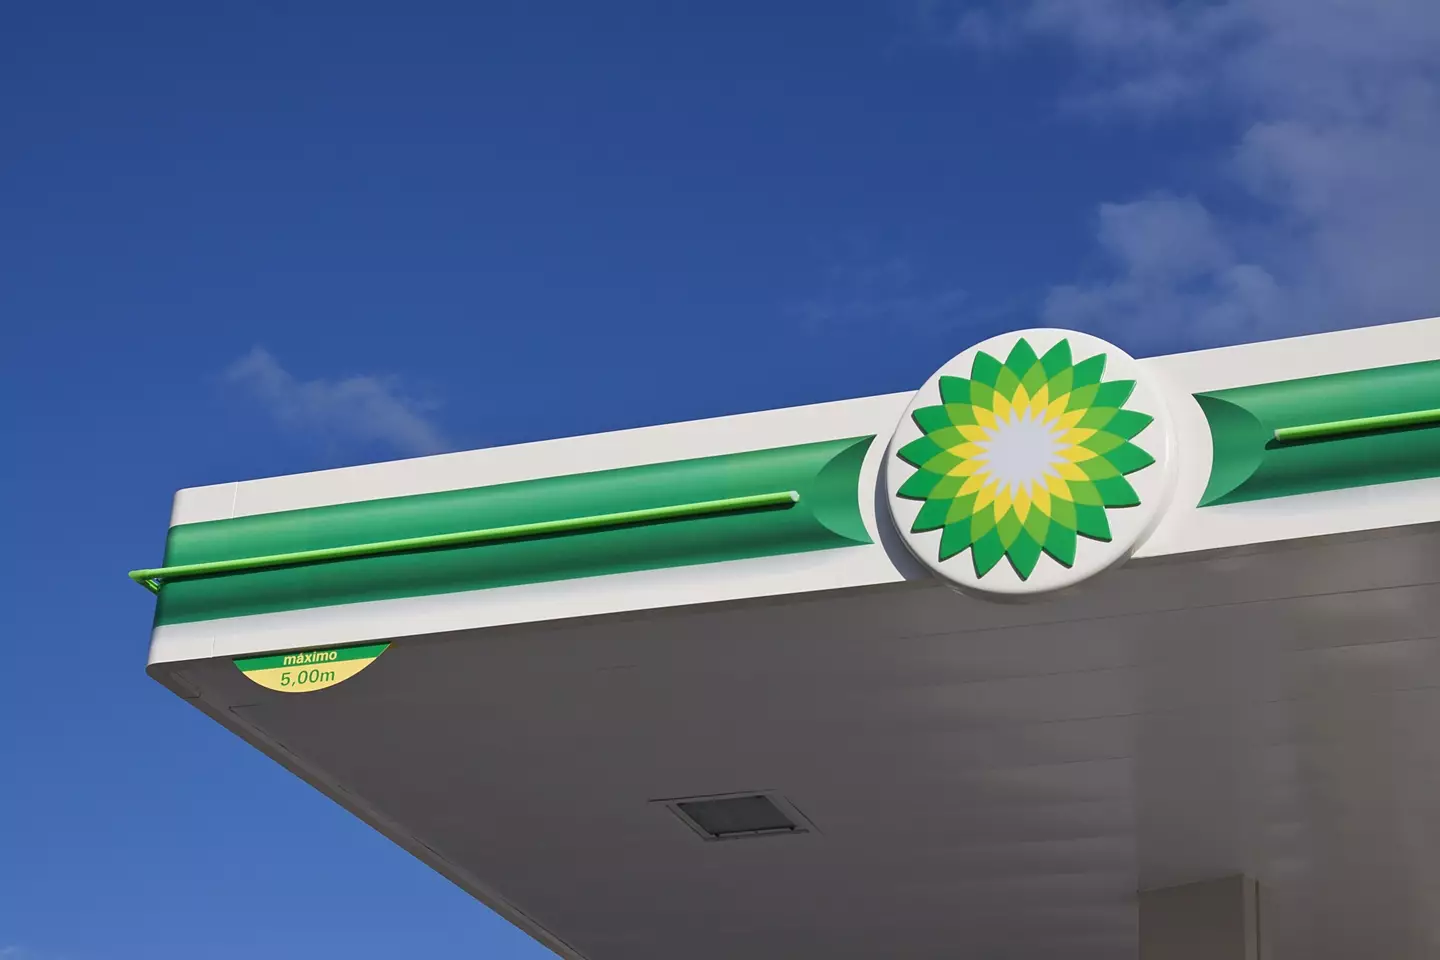 BP are one of many energy giants posting large profits in a cost of living crisis.